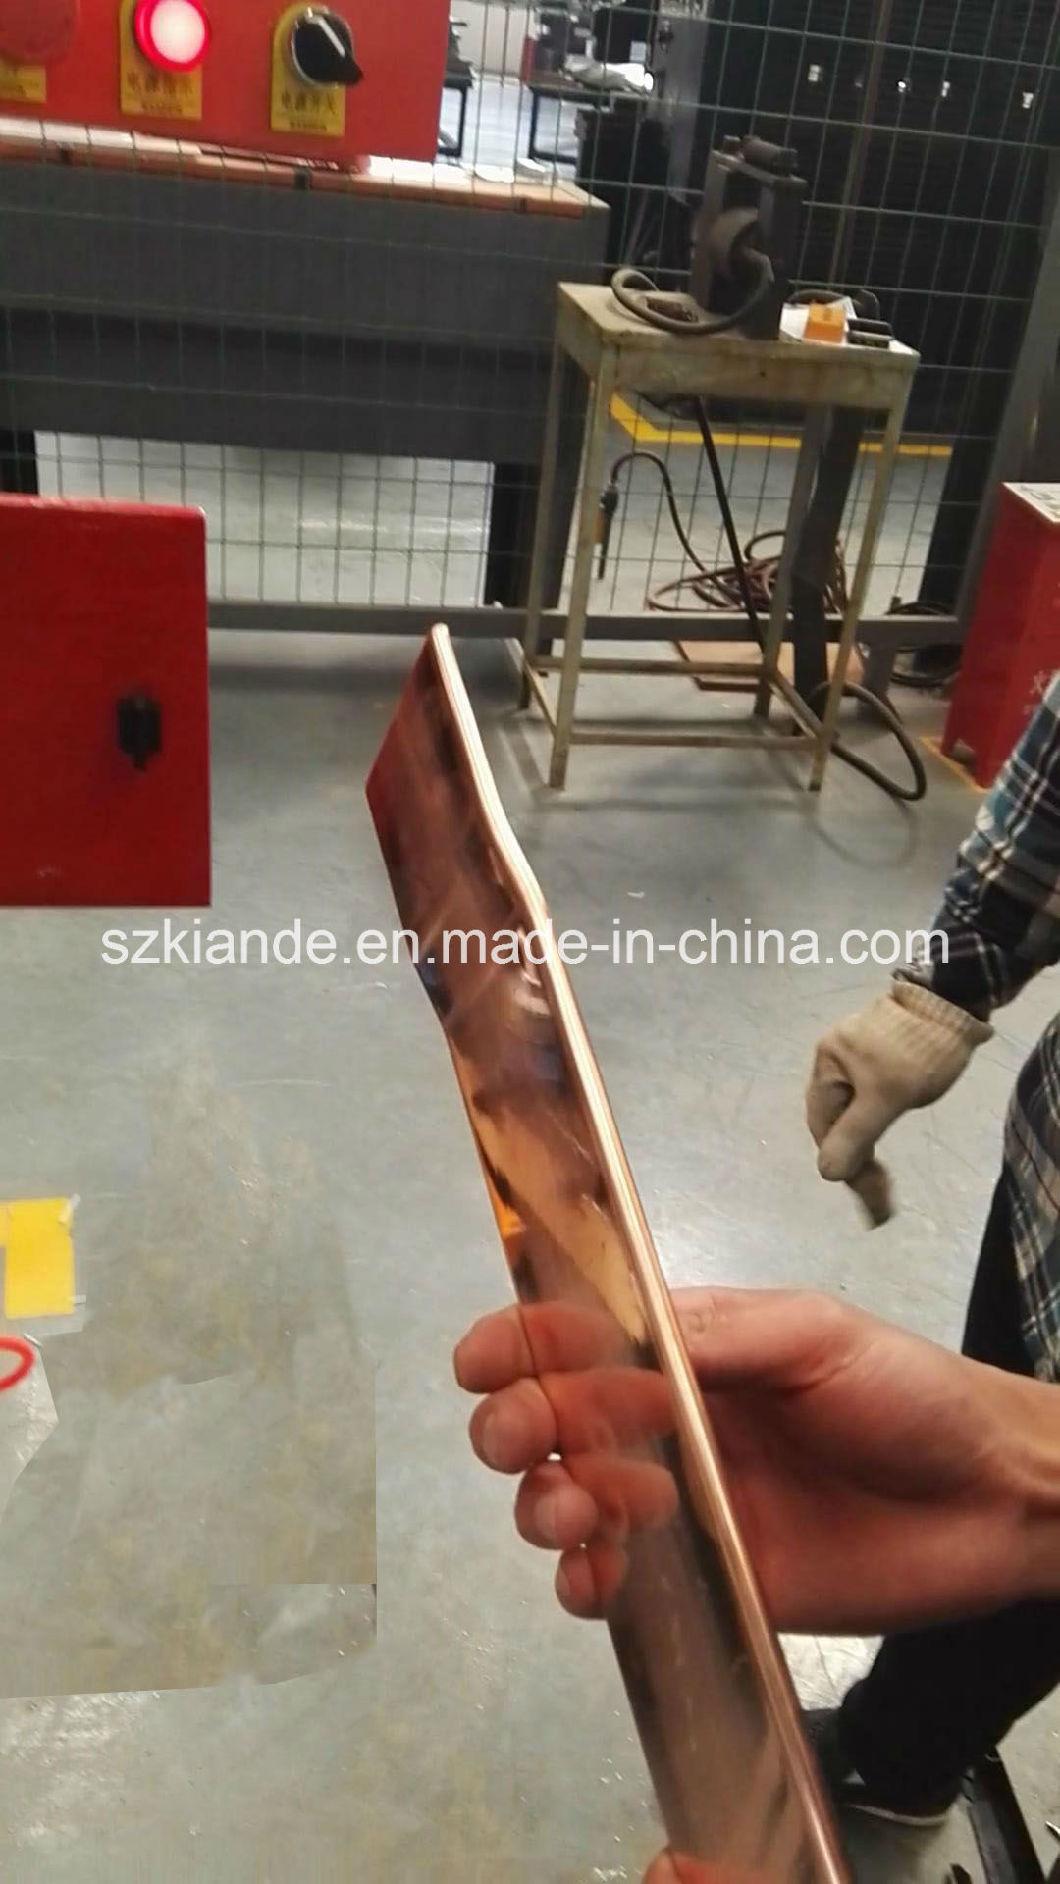 Bbt Busbar Bending Punching Machine Copper Bar Processing Machinery for Compact Busway System